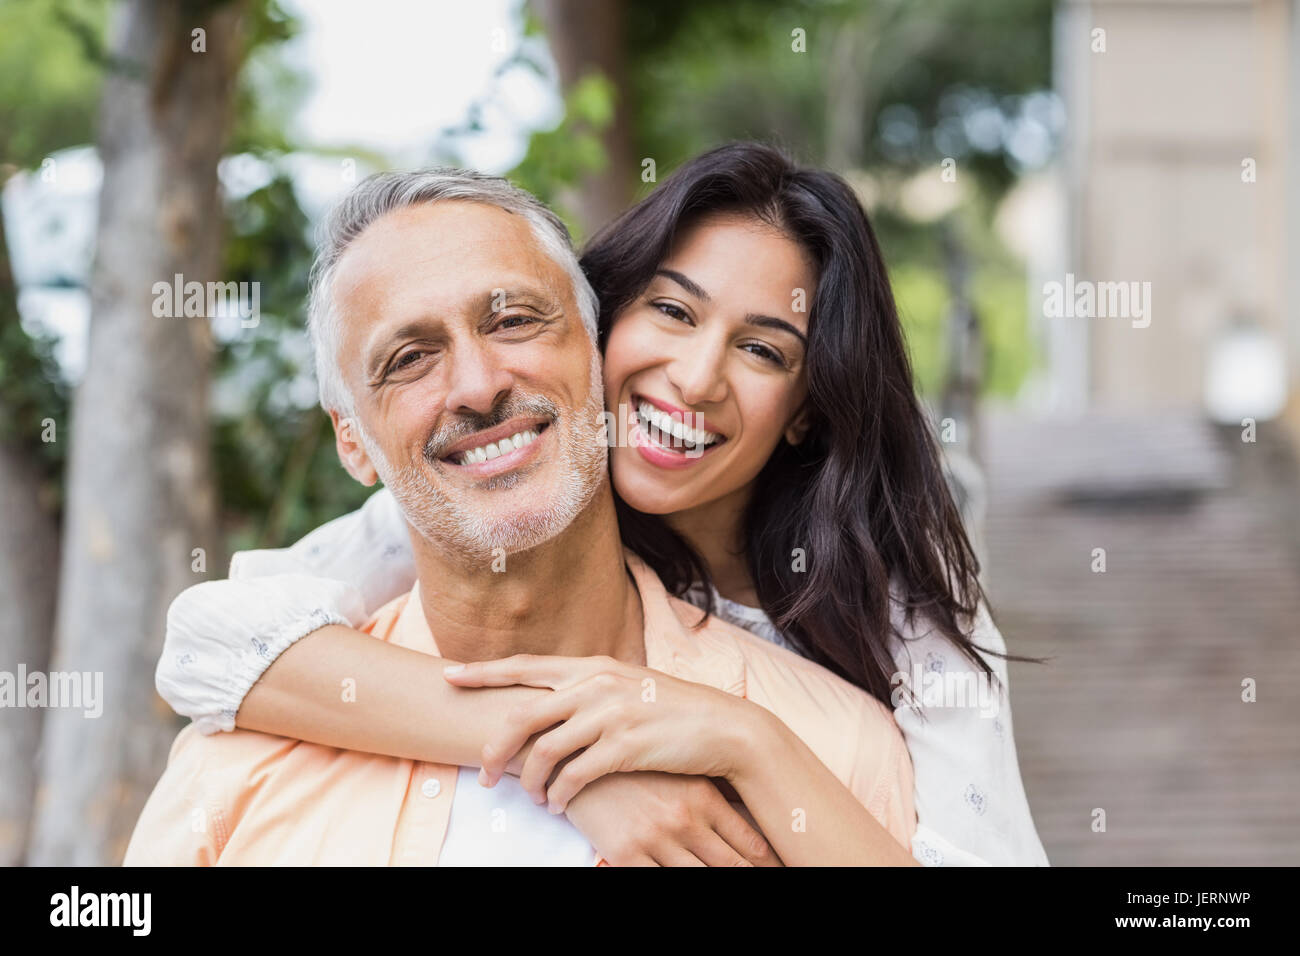 Woman embracing man from behind Stock Photo